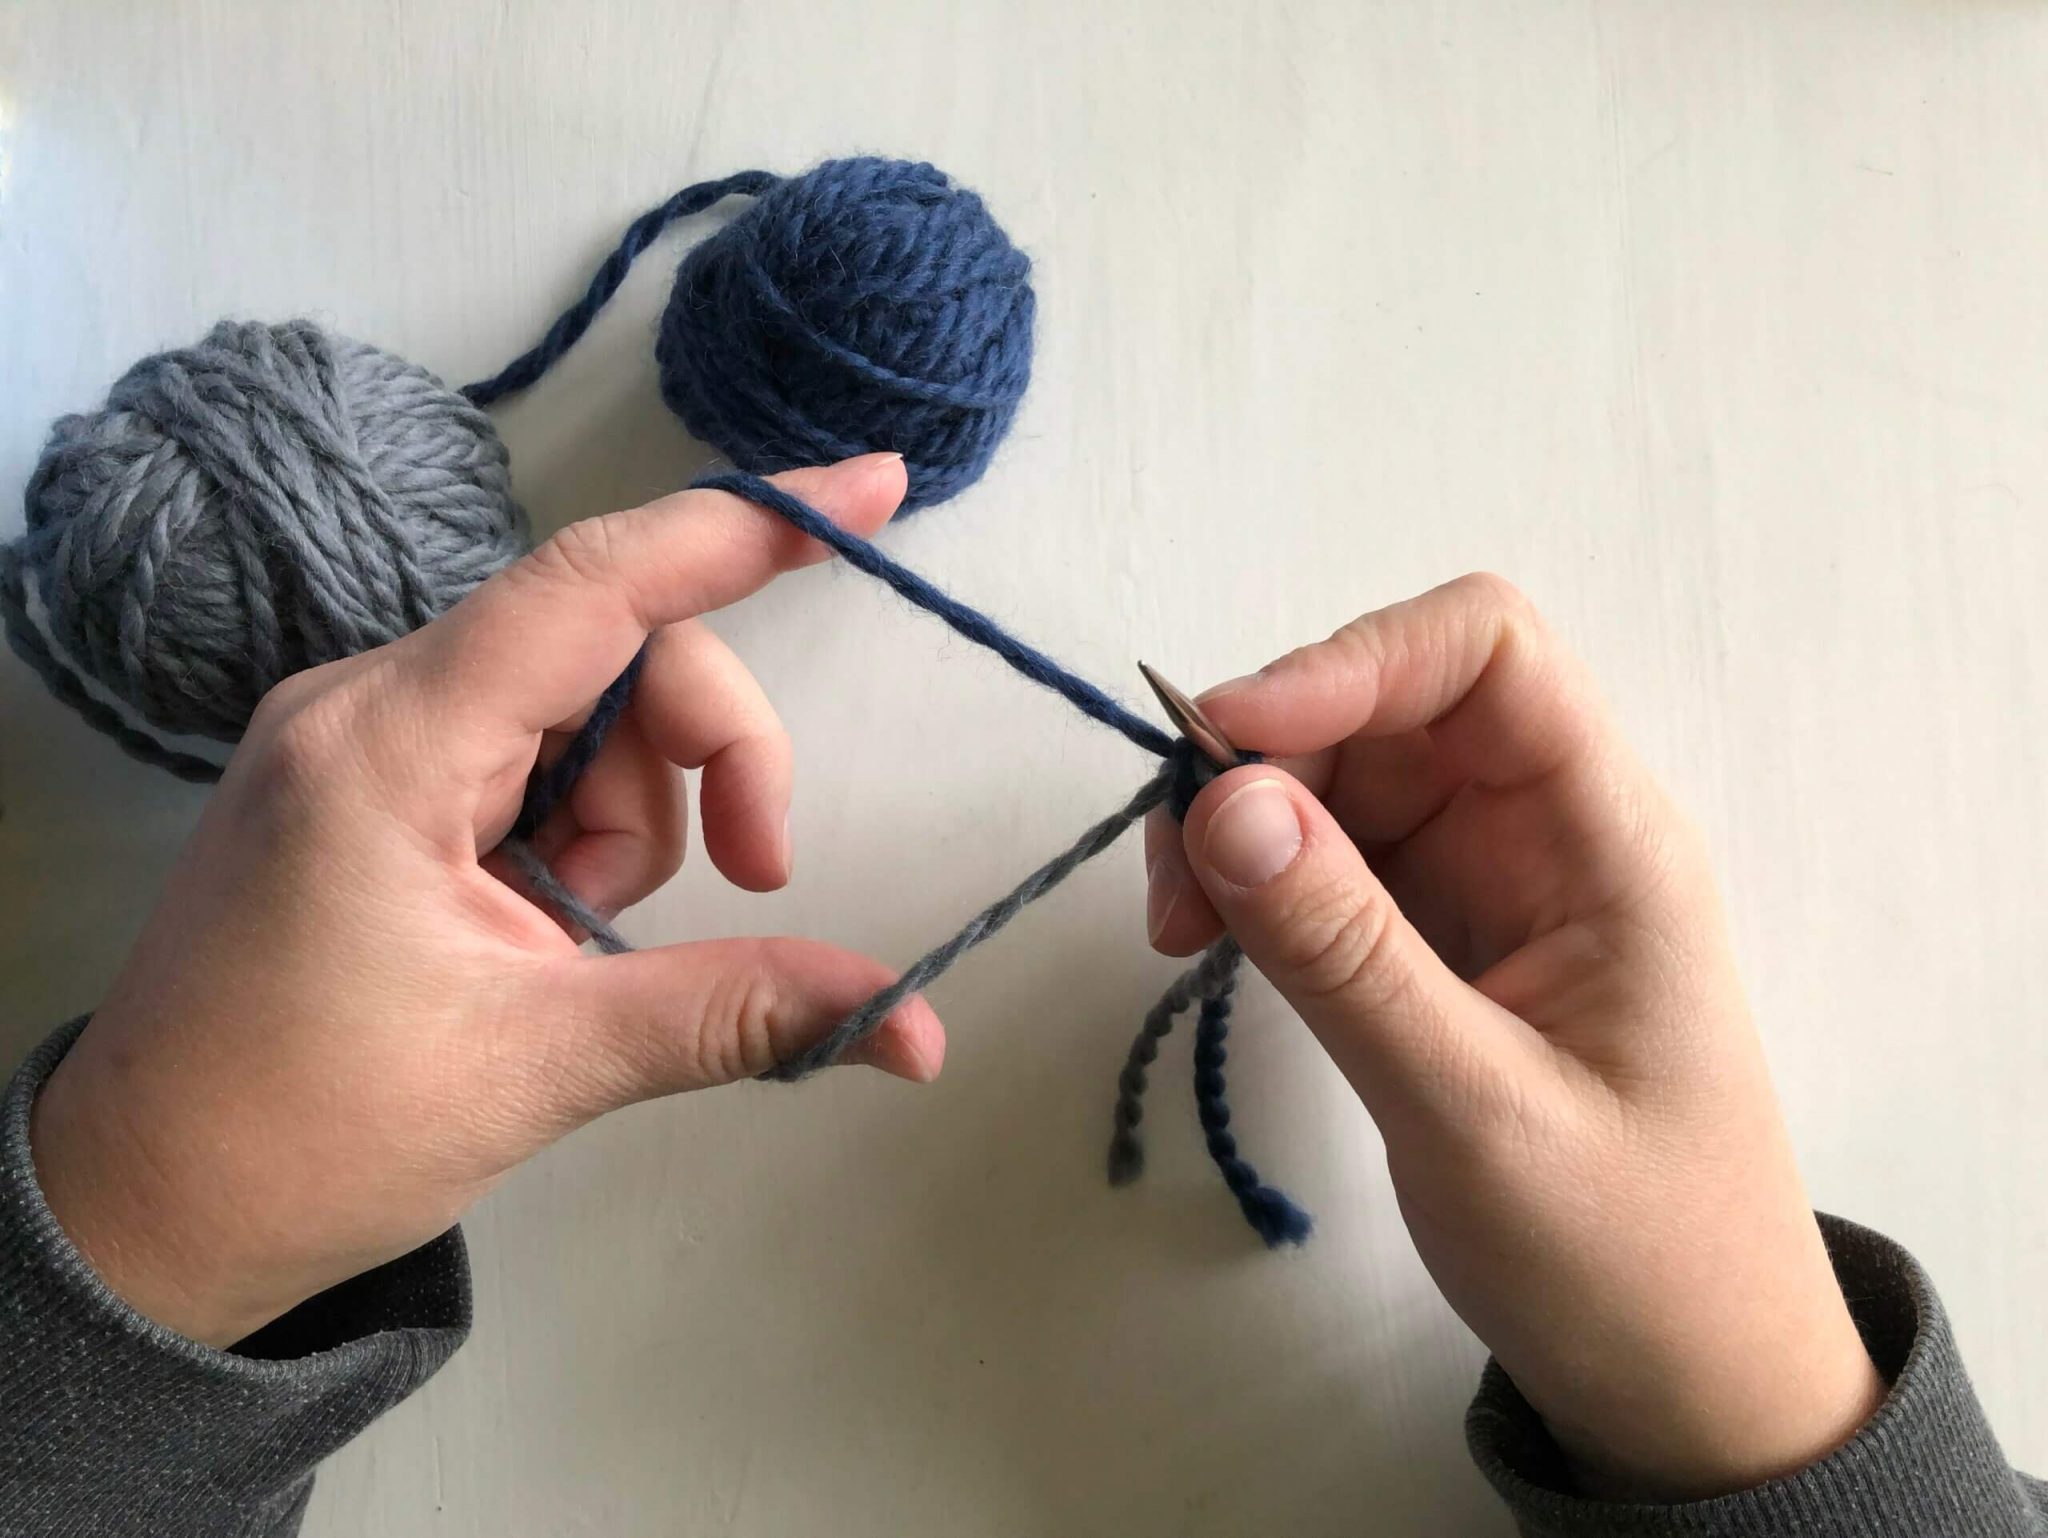 Image shows how to hold the yarn and needle when dong the Latvian braid cast on